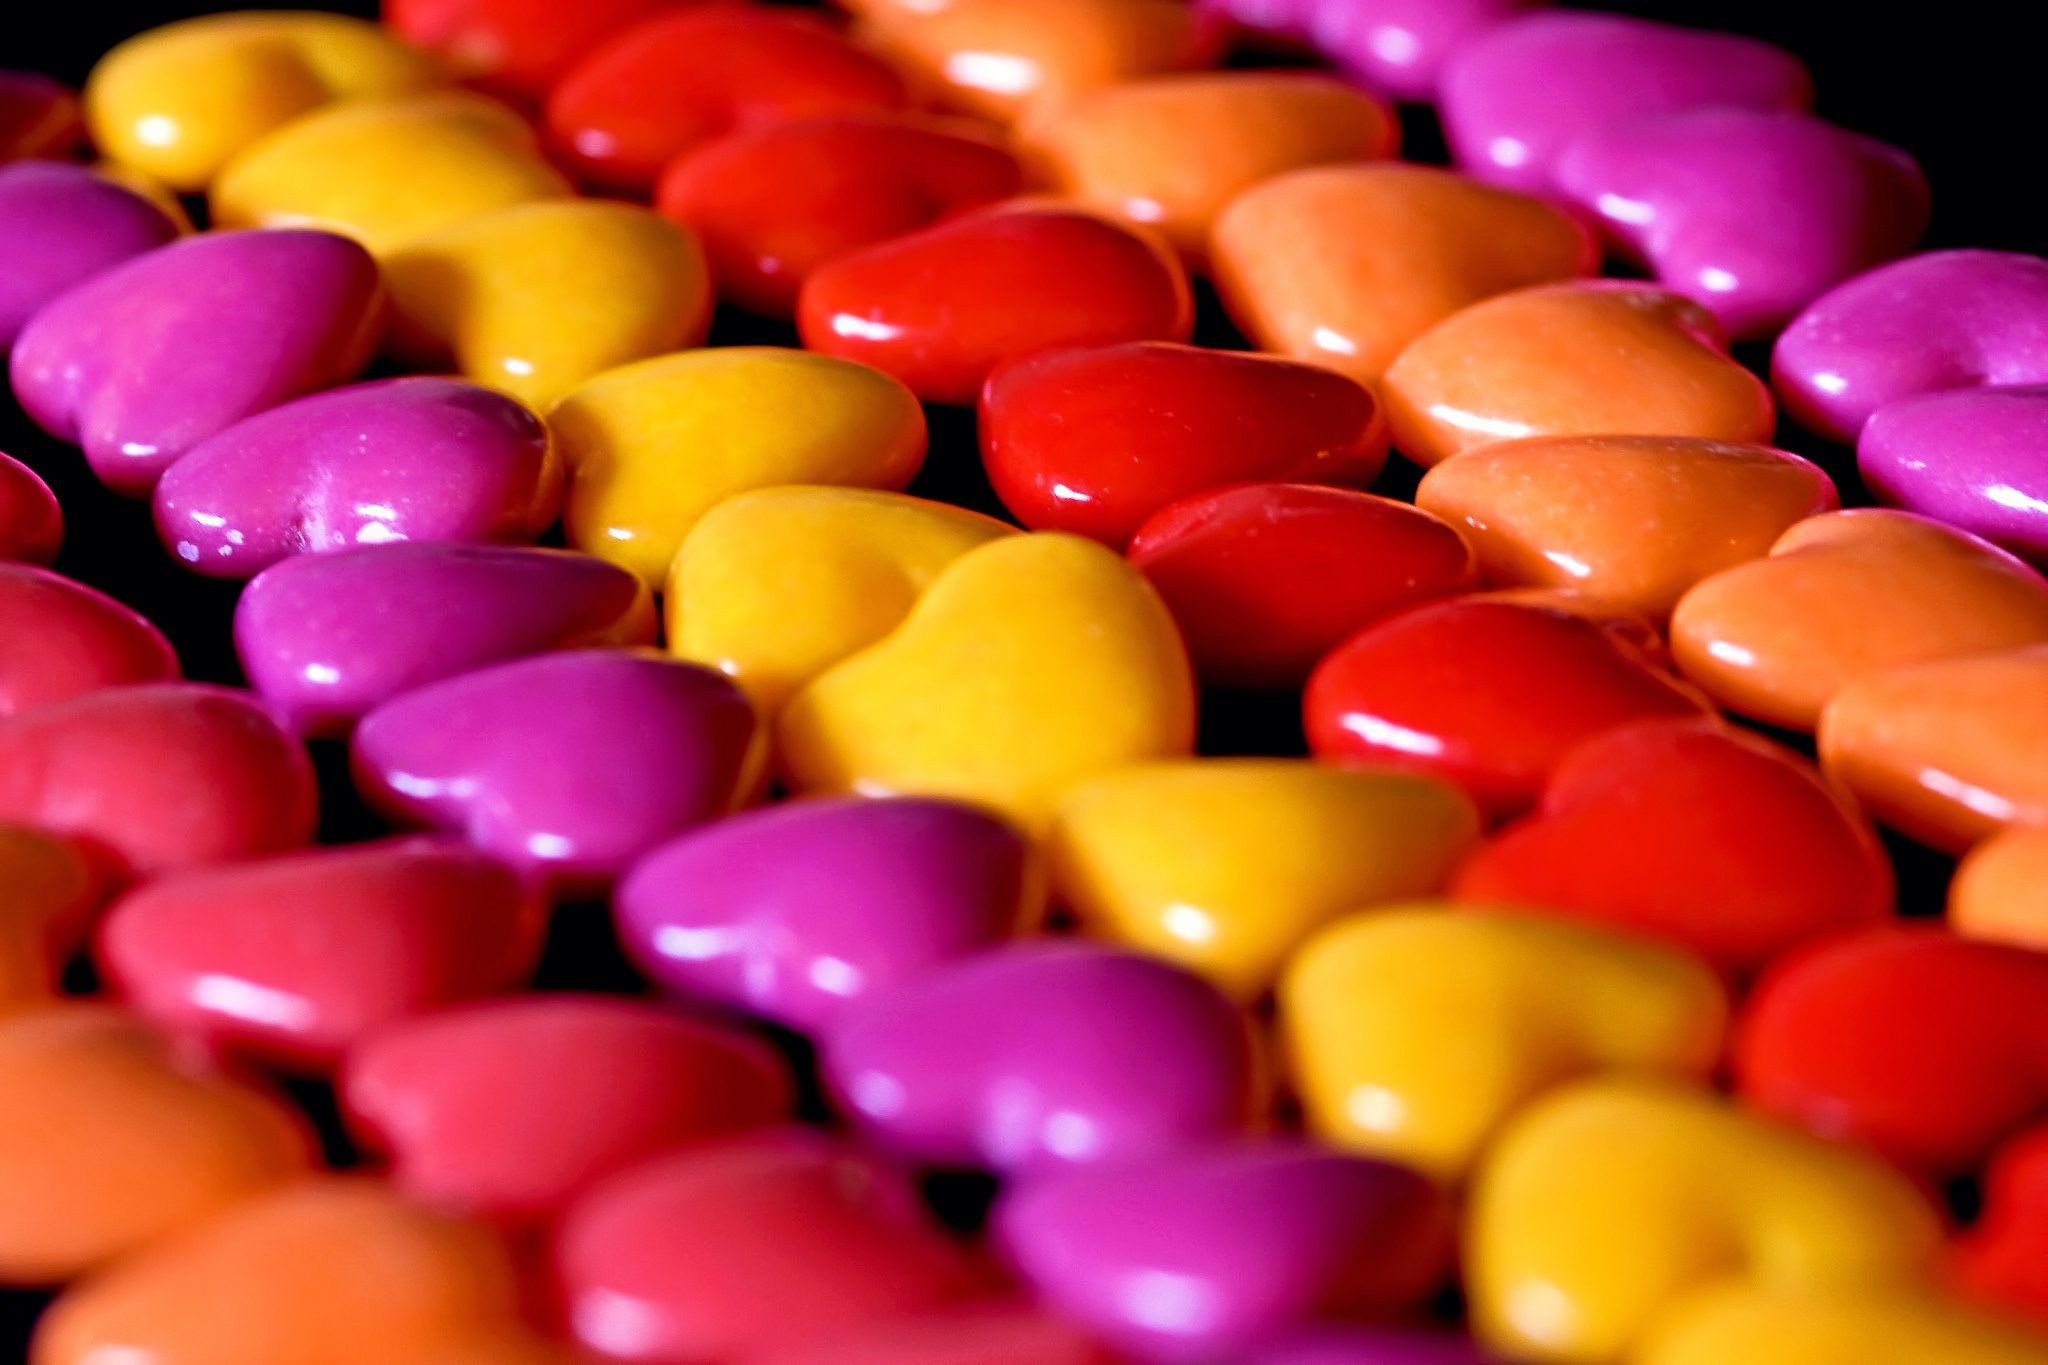 candy jelly beans hearts close up bokeh wallpaper background